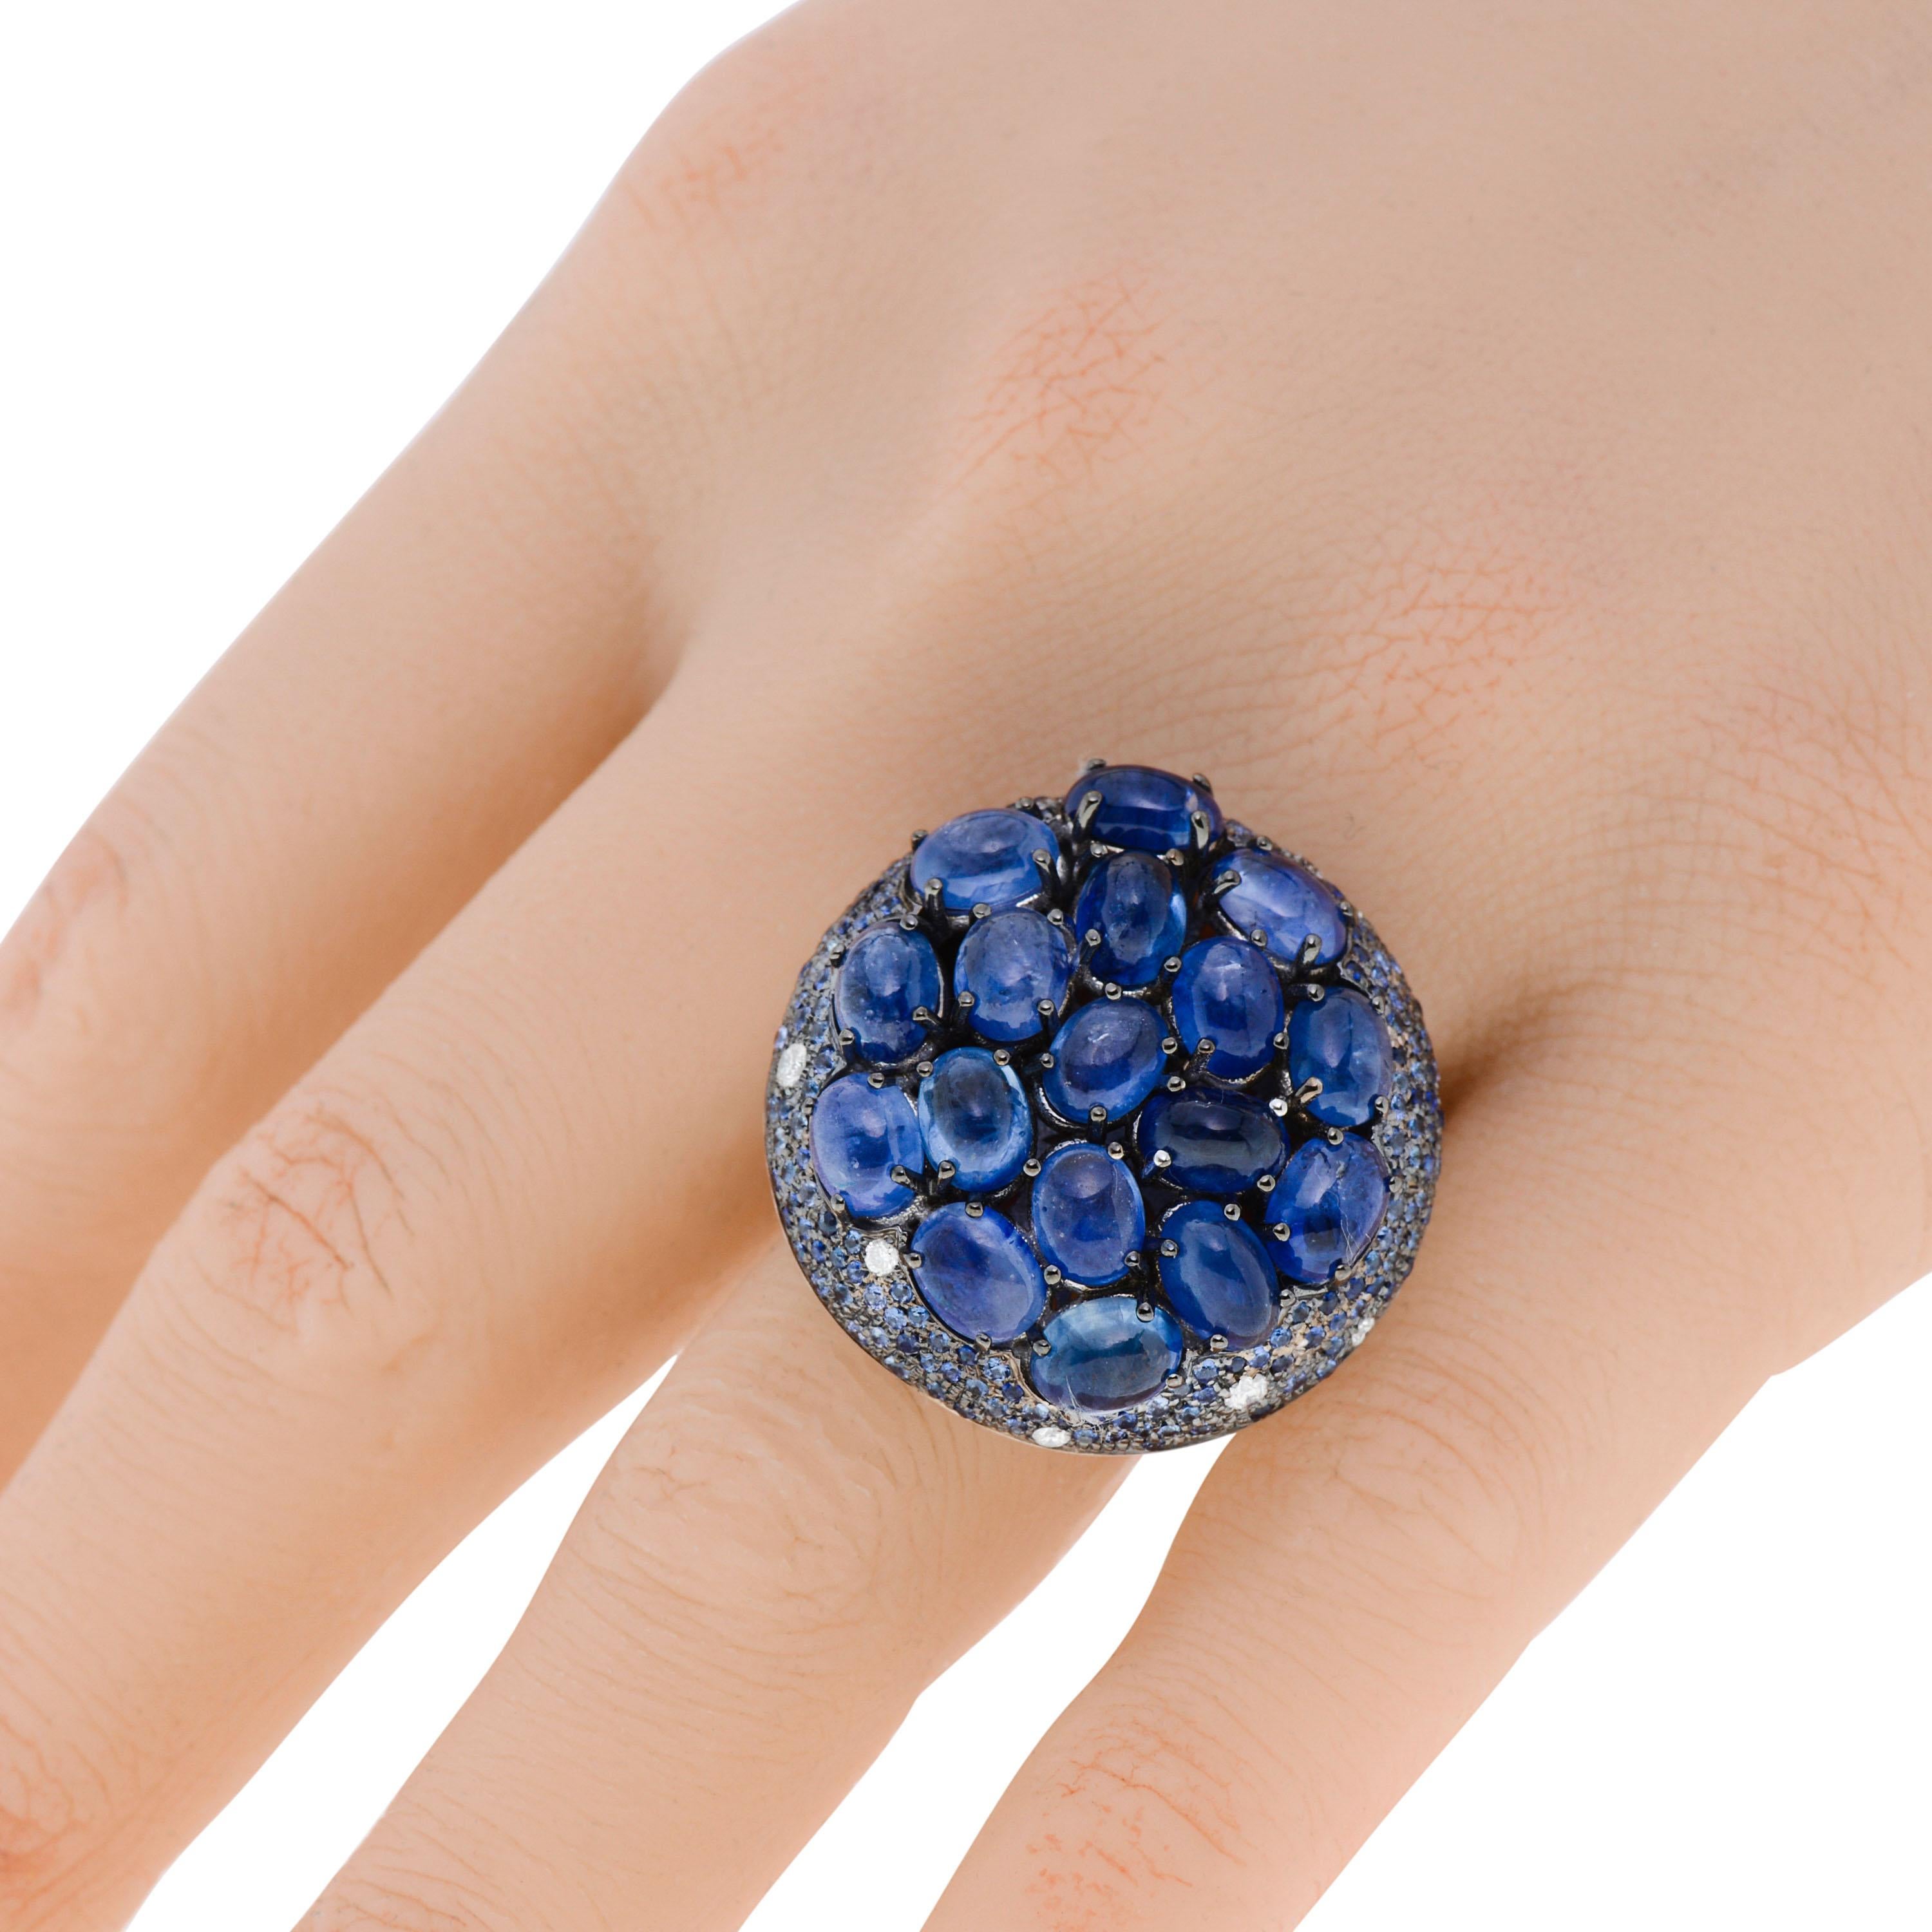 This Zydo 18K White Gold Statement Ring features a cluster of 16.91ct. tw. cabochon and pave sapphires adorned with 0.15ct. tw. round diamond accents. The ring size is 6.75 (53.8). The decoration size is 1 1/8